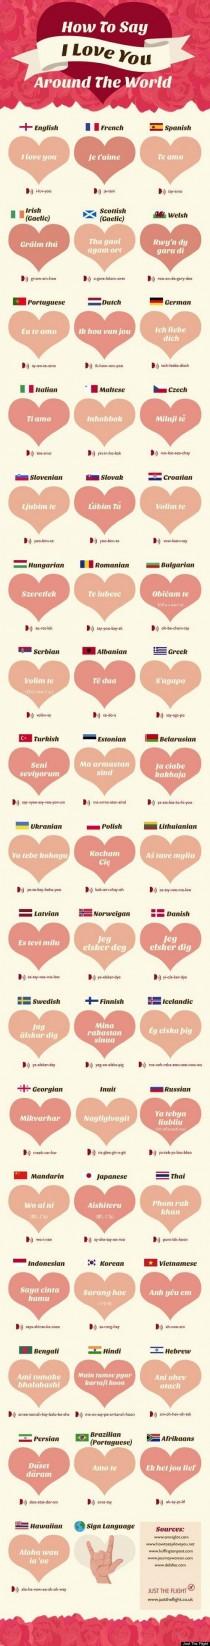 wedding photo - How To Say 'I Love You' In Any Language